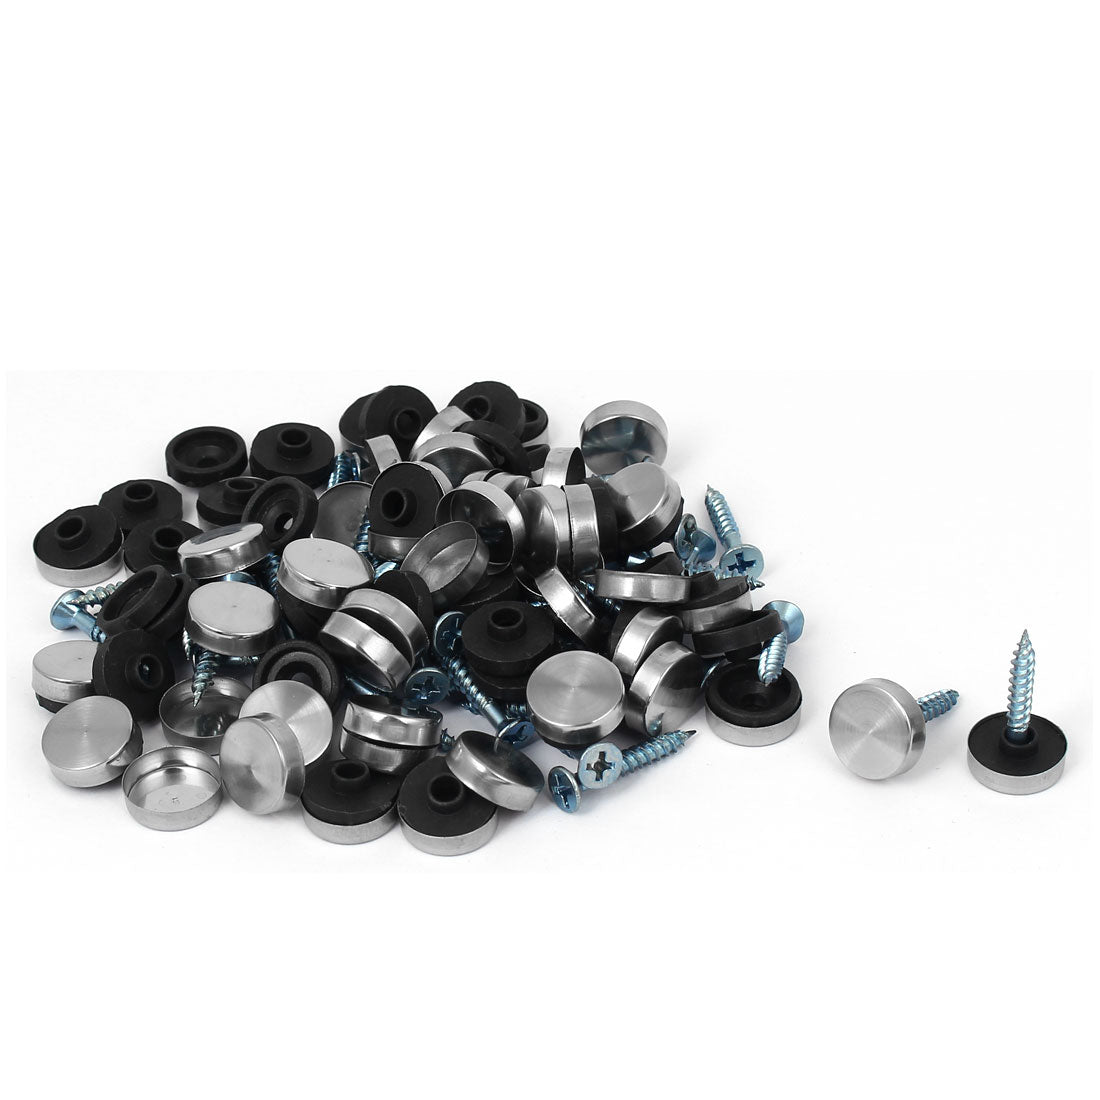 uxcell Uxcell Home Decor Fittings Stainless Steel Mirror Screw Nails 14mm Diameter Cap 50 Pcs